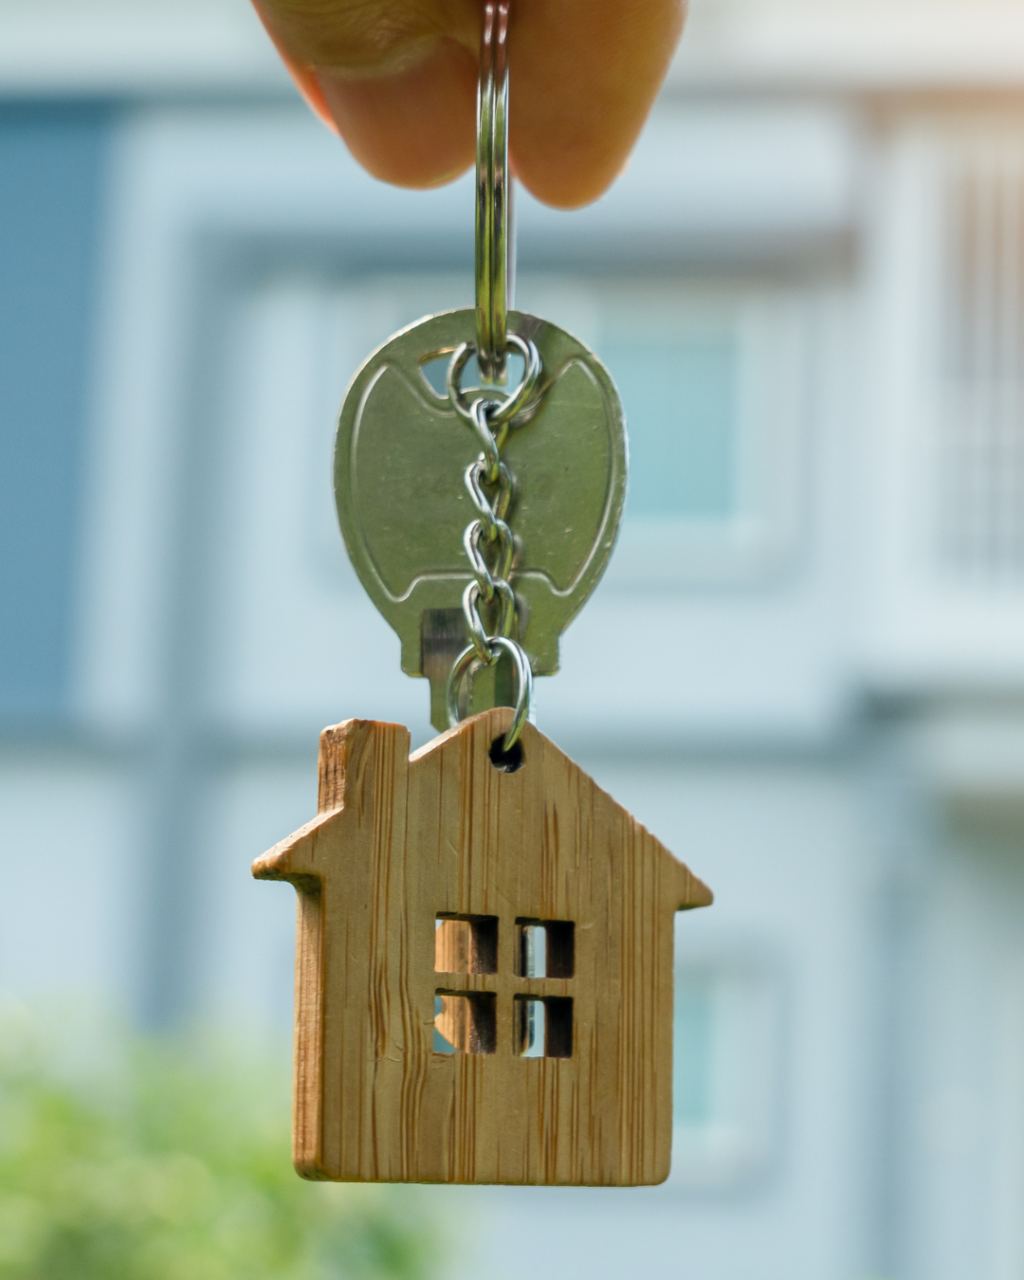 What to Look for When Buying a Rental Property